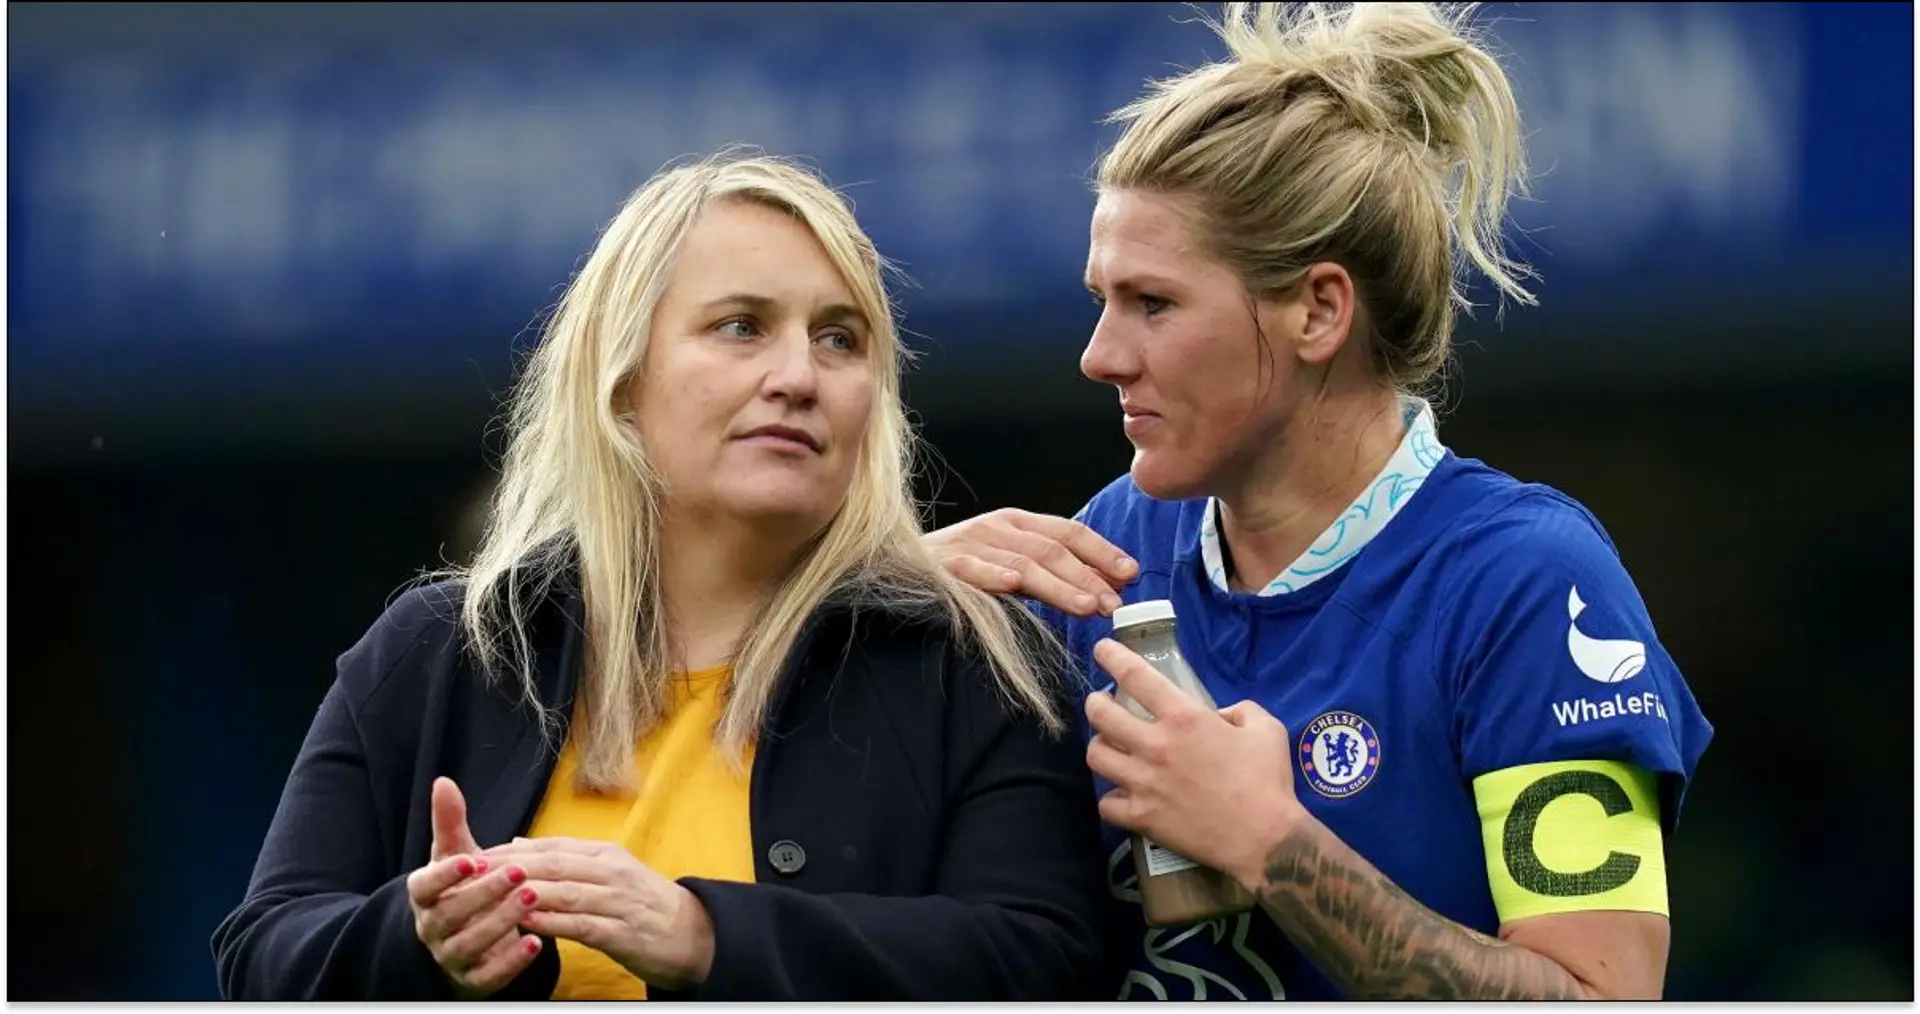 Emma Hayes back in dugout after surgery & 4 more under-radar stories at Chelsea